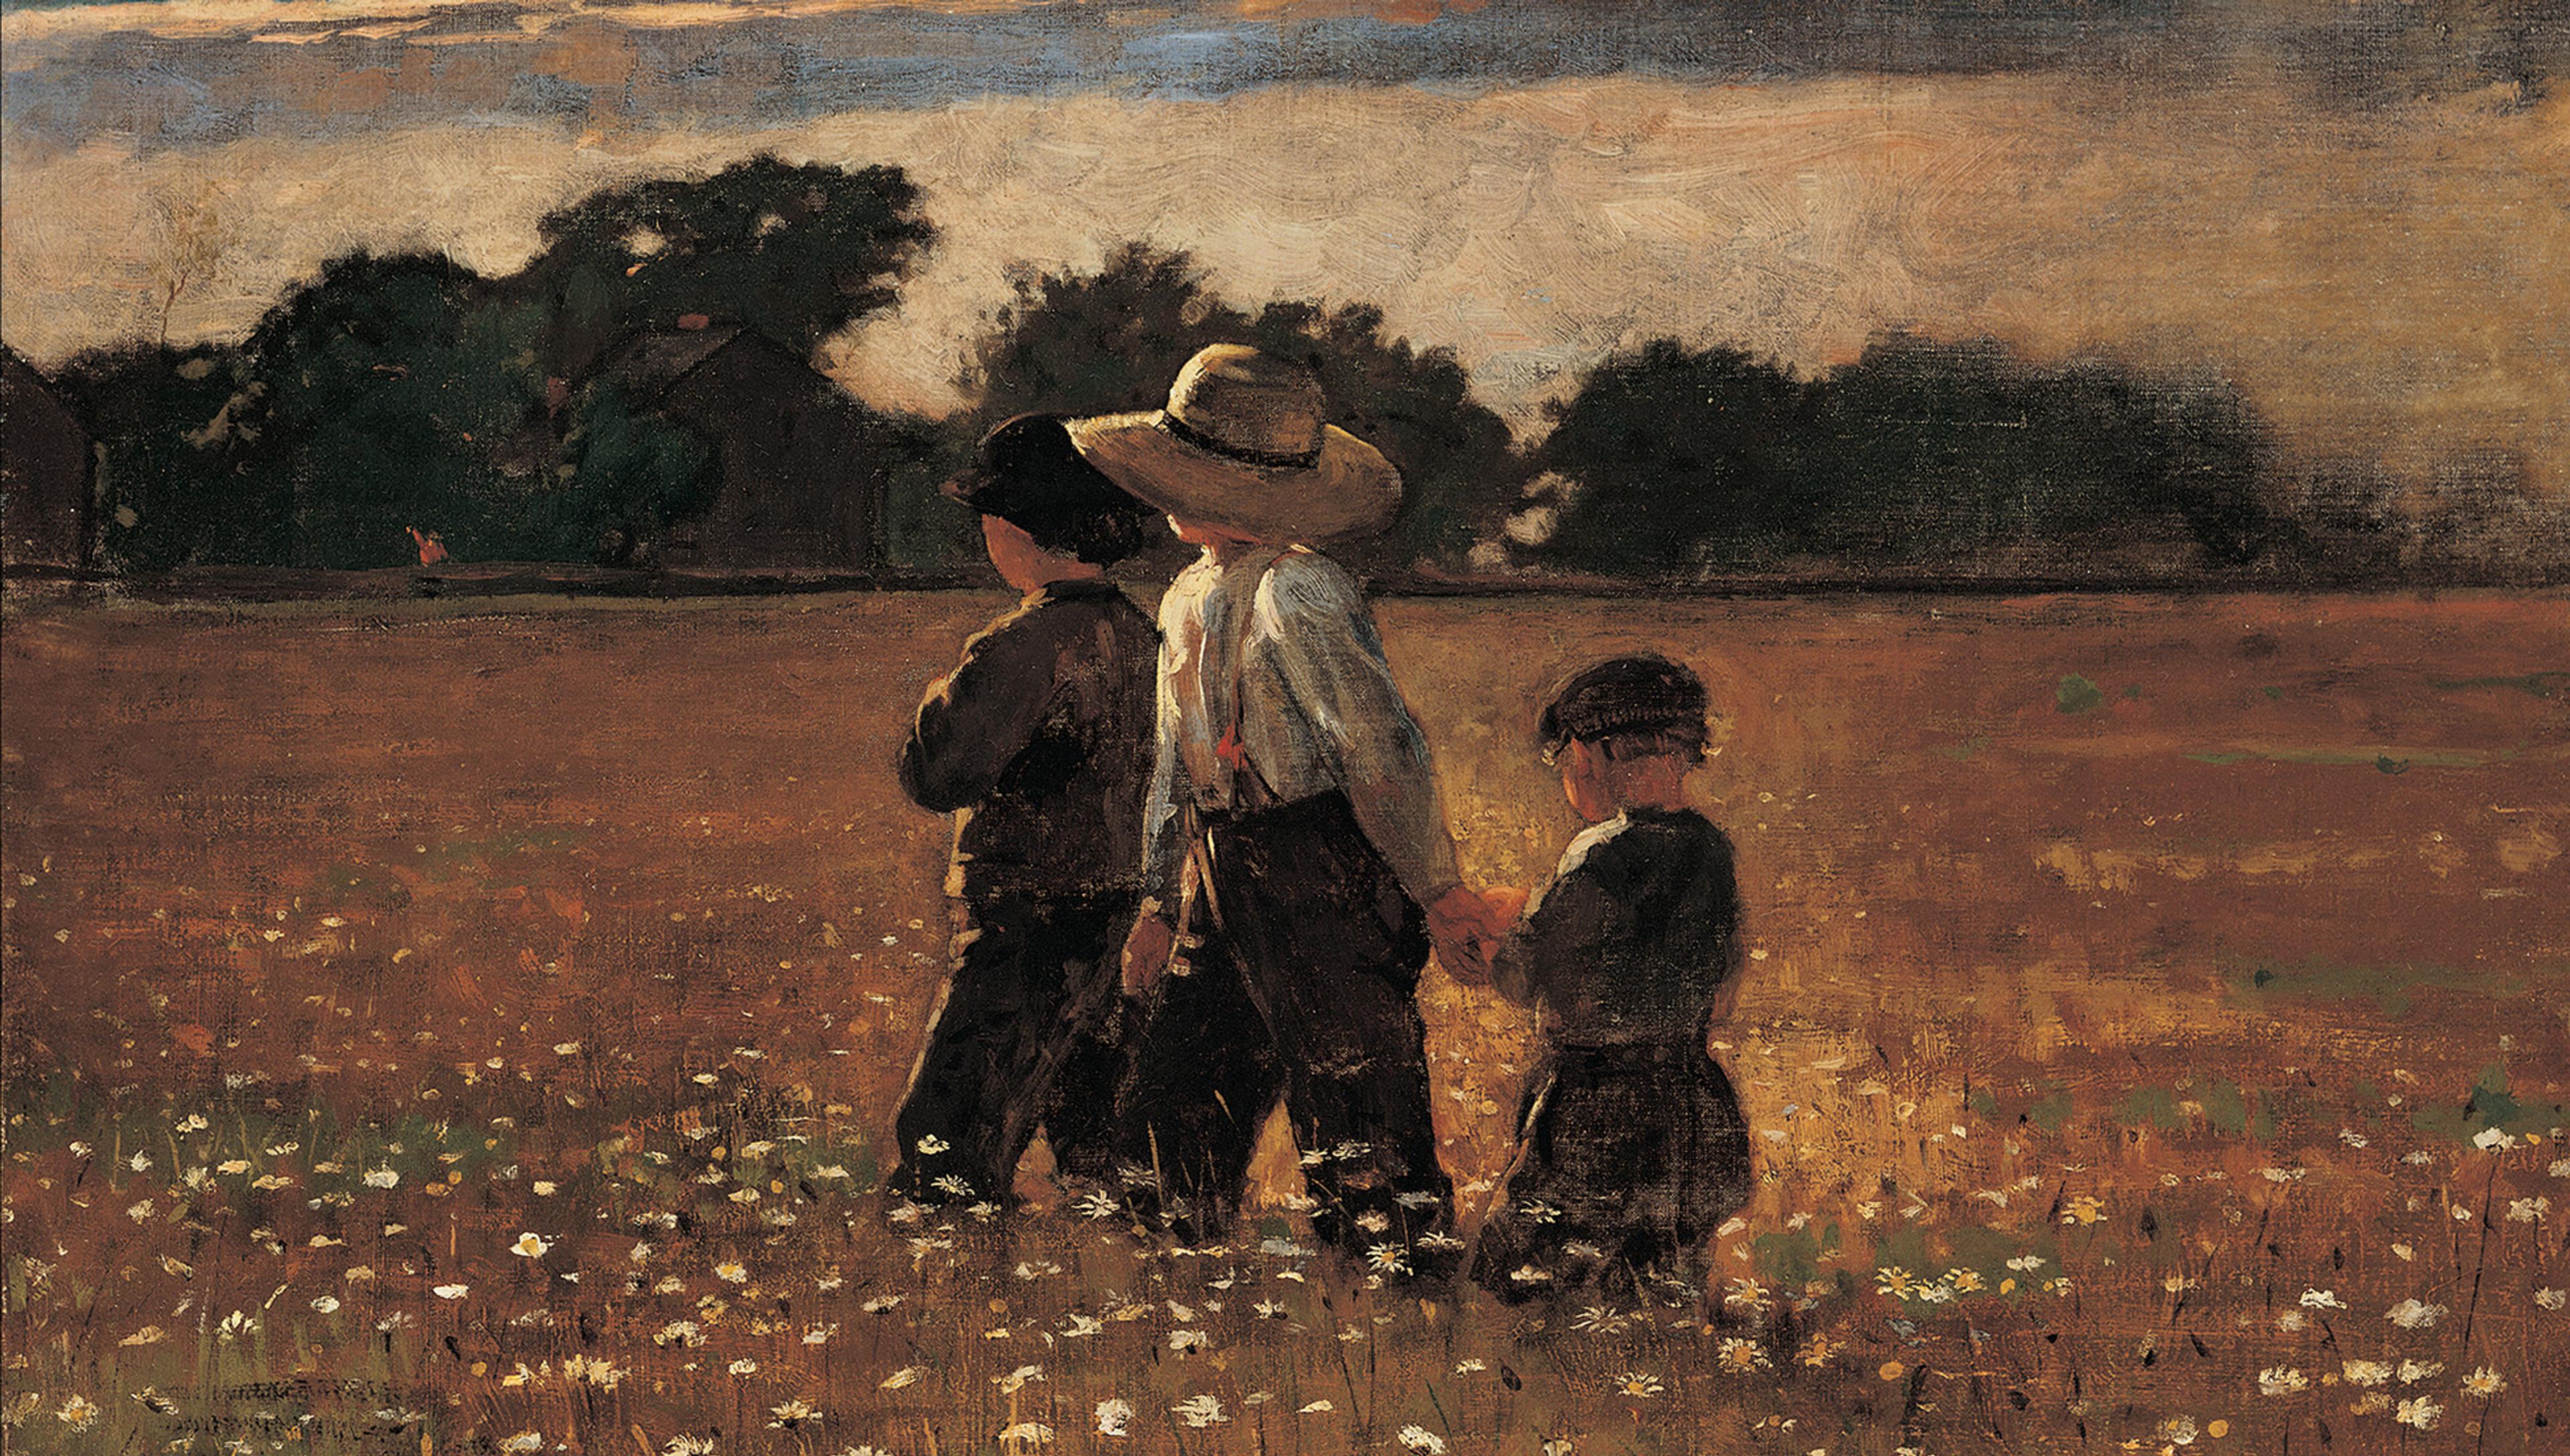 A painting depicts three children dressed in old-fashioned clothing walking through a field of wildflowers at dusk. Two older children, one wearing a large brimmed hat, lead a younger child by the hand. The background shows a line of trees against a cloudy sky with a hint of sunset.